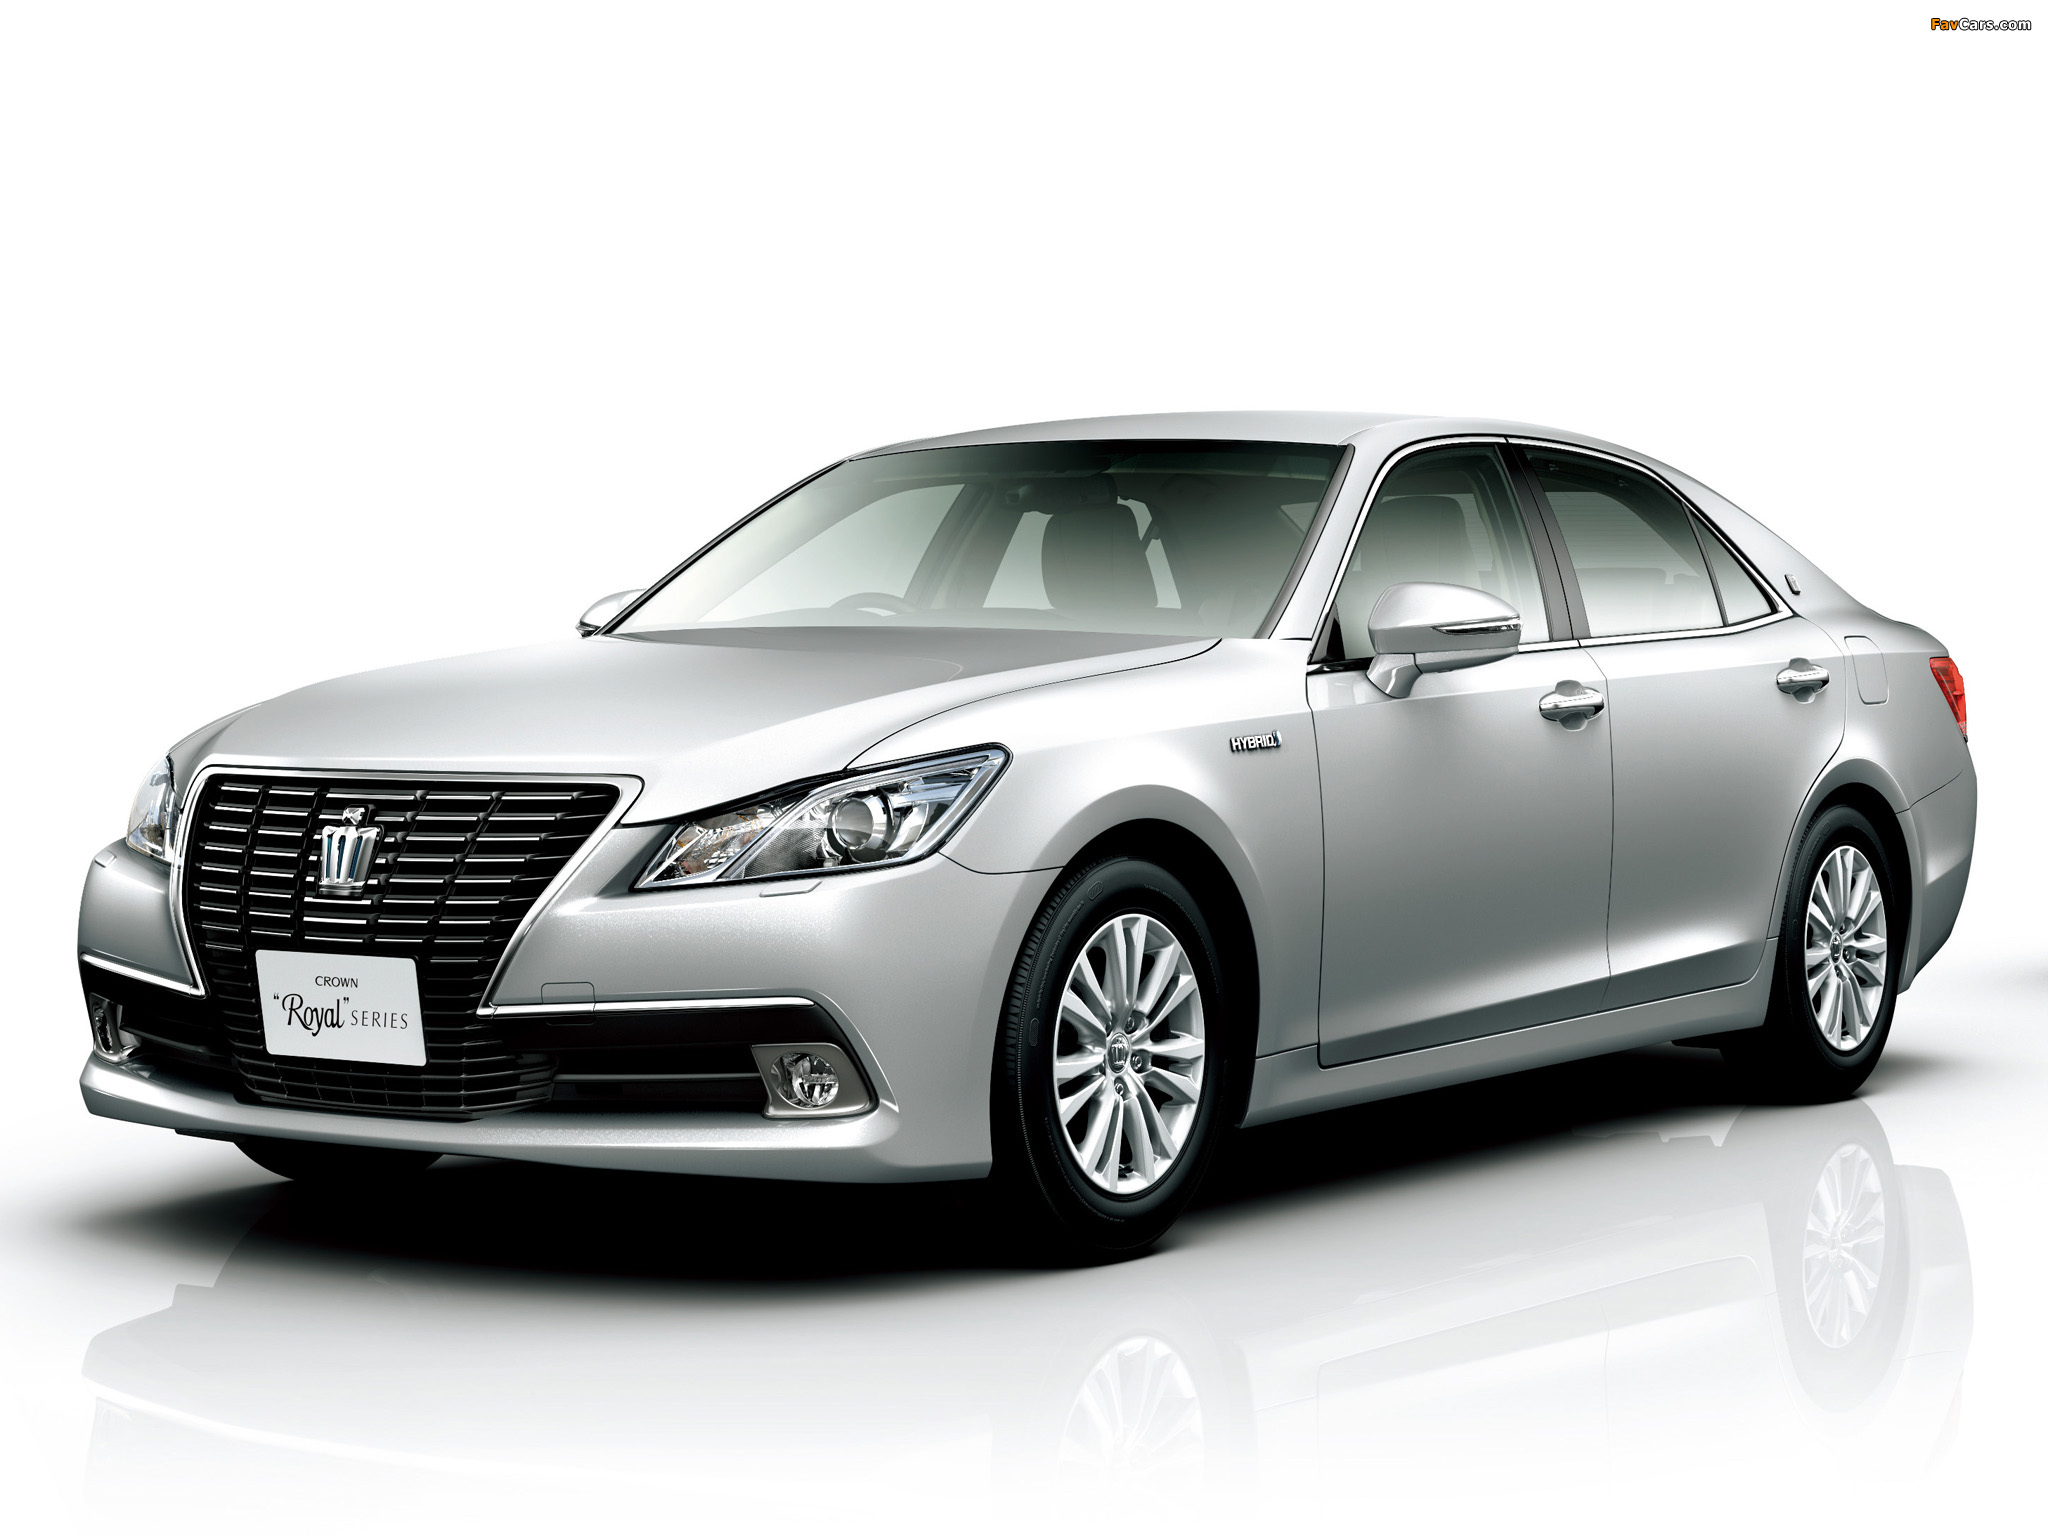 Toyota Crown Hybrid Royal Saloon (S210) 2012 images (2048 x 1536)